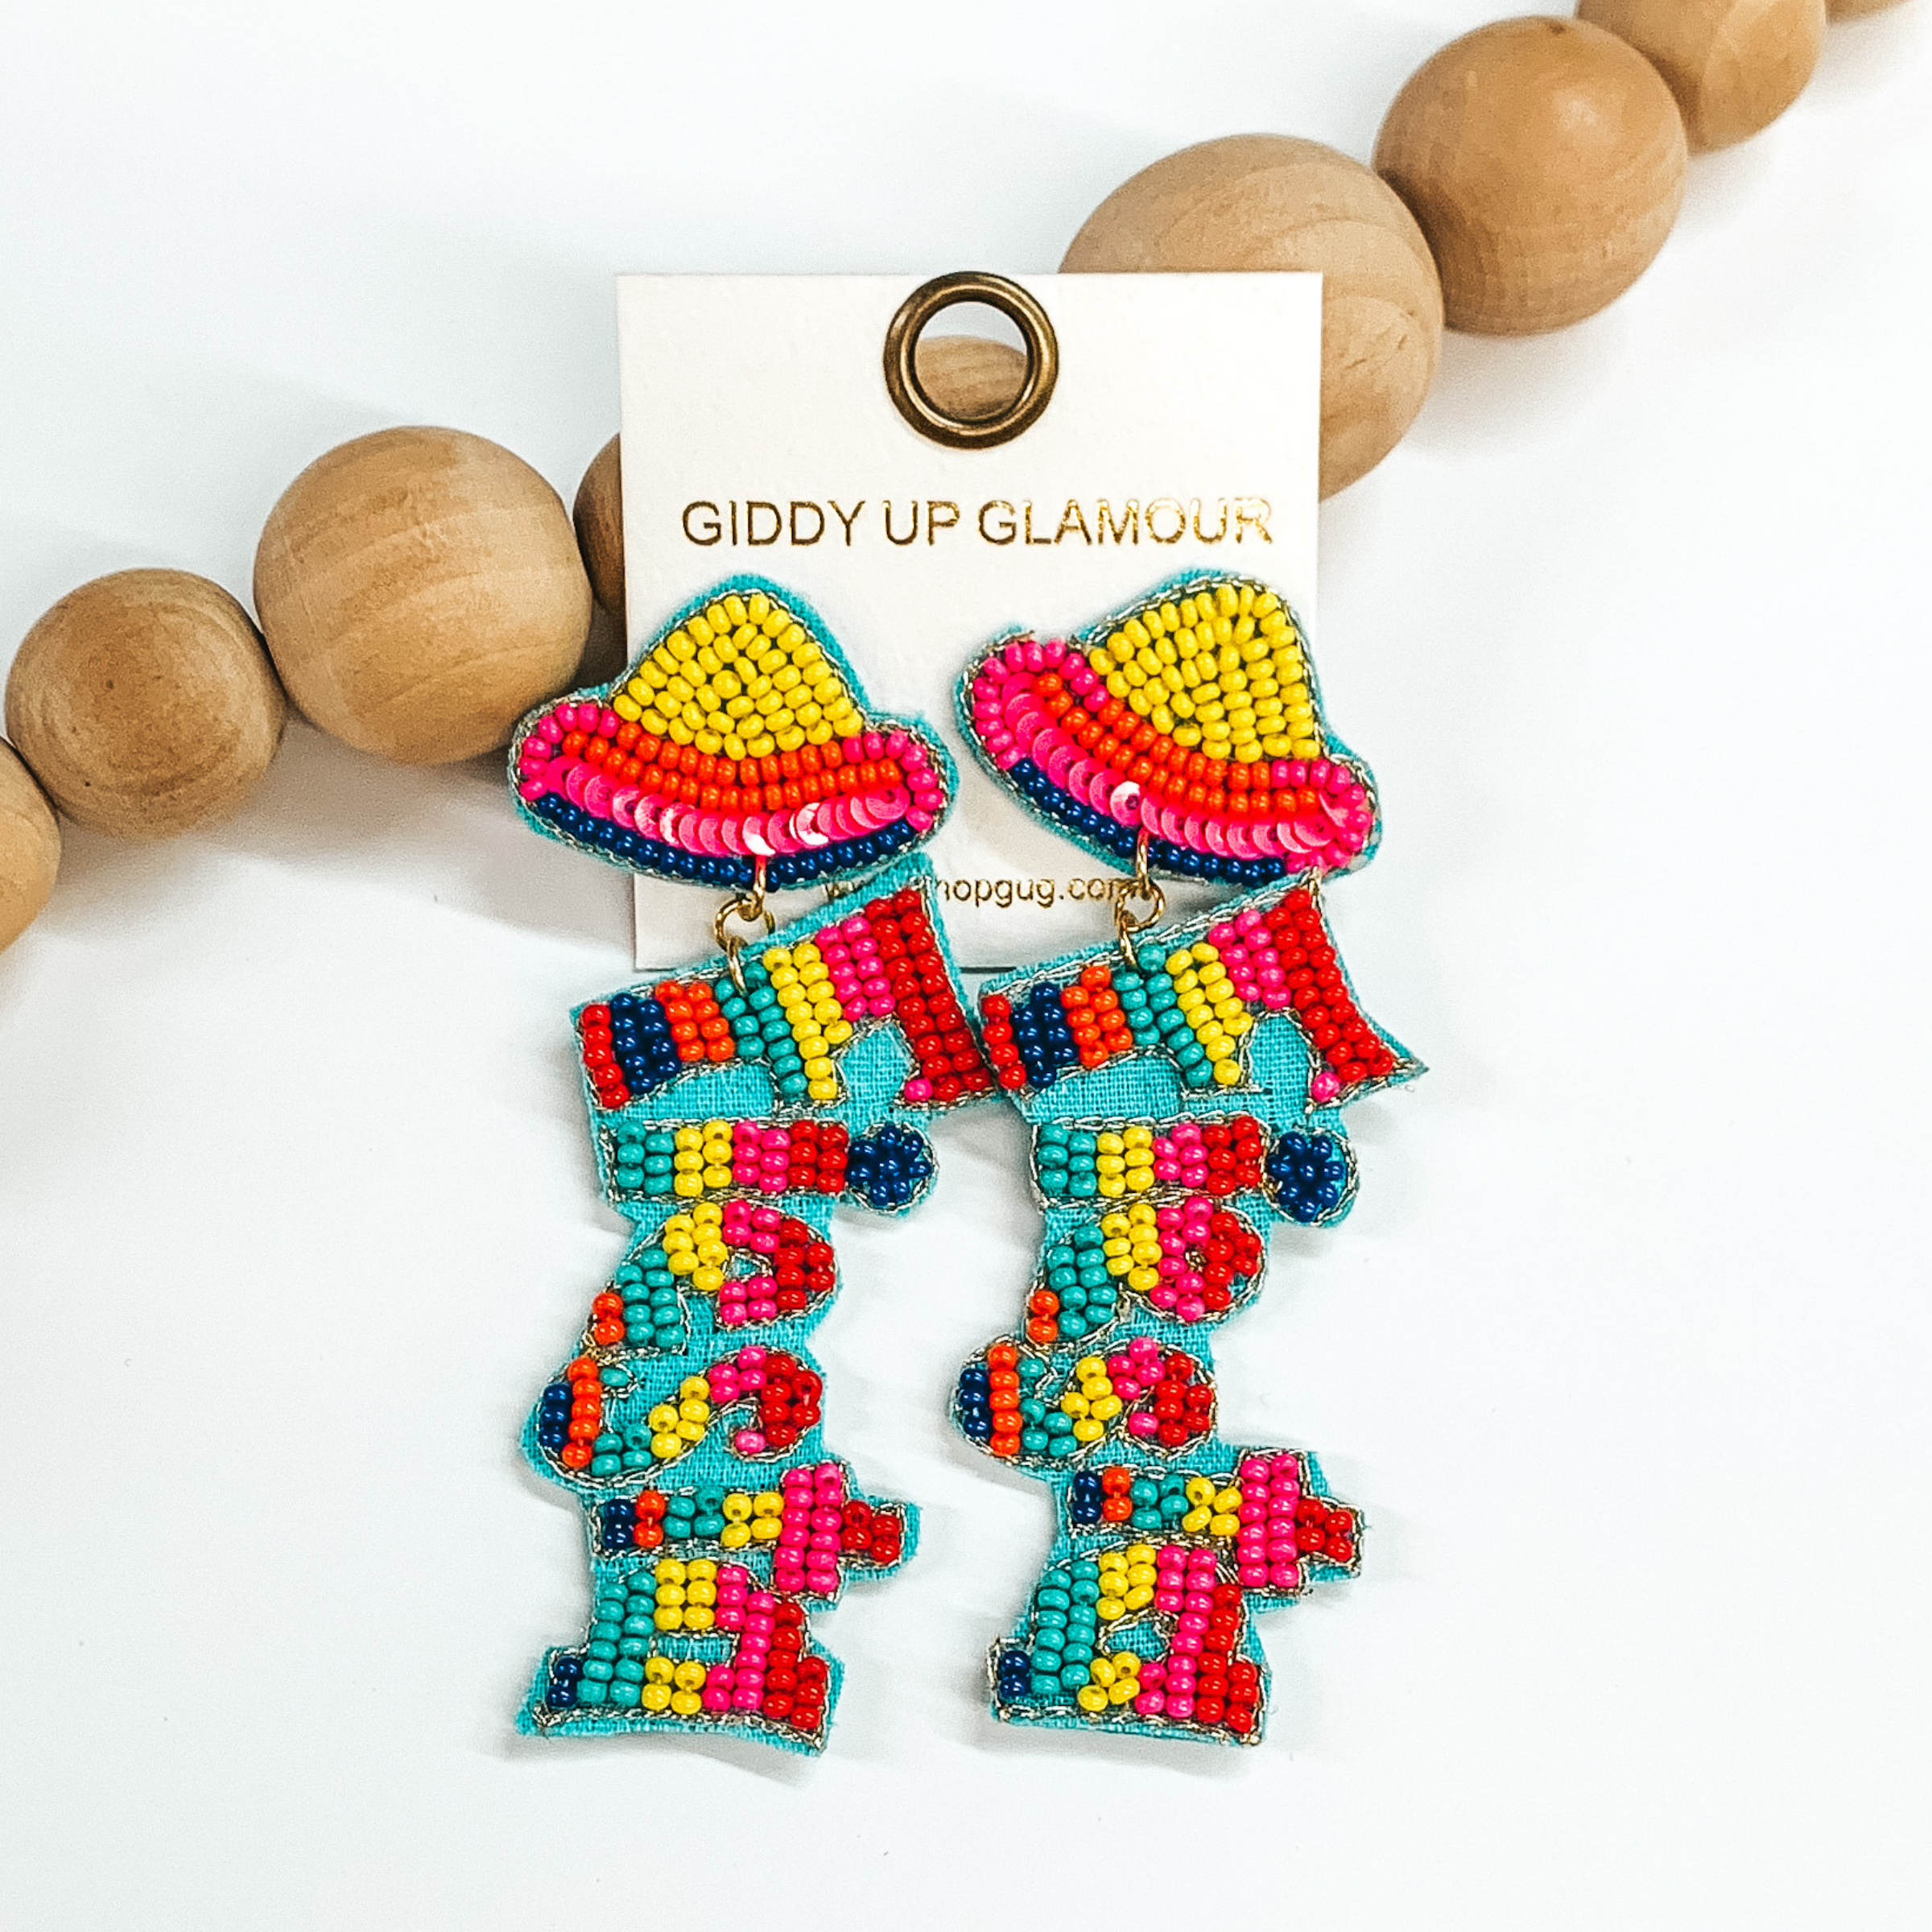 Sombrero fiesta seed beaded drop earrings in  multicolor. The sombrero has yellow, orange, dark  blue, and pink sequins. The fiesta has red, pink,  yellow, turquoise, orange, dark blue, and  red beads. Outlined in turquoise with gold thread. Taken in a white background with brown beads as decor.